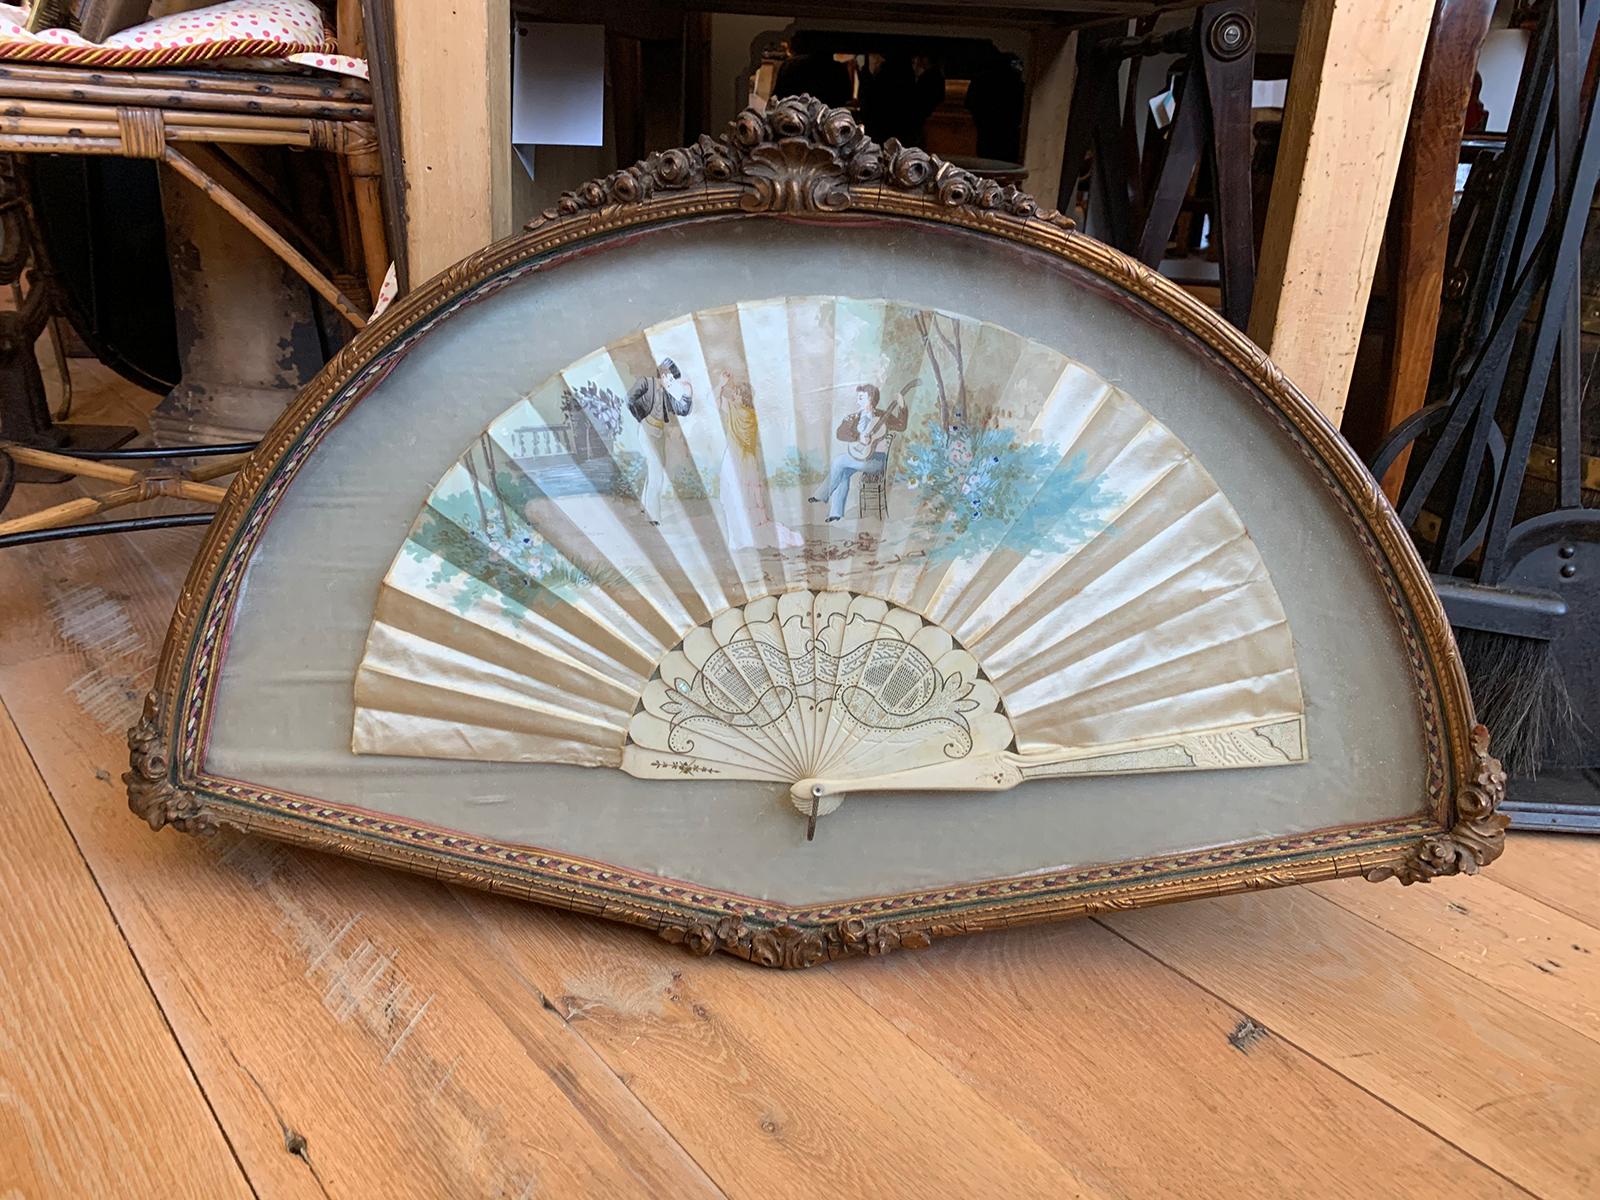 18th-19th century hand painted silk fan with mother of pearl handle in glass and giltwood display case / frame with stand.